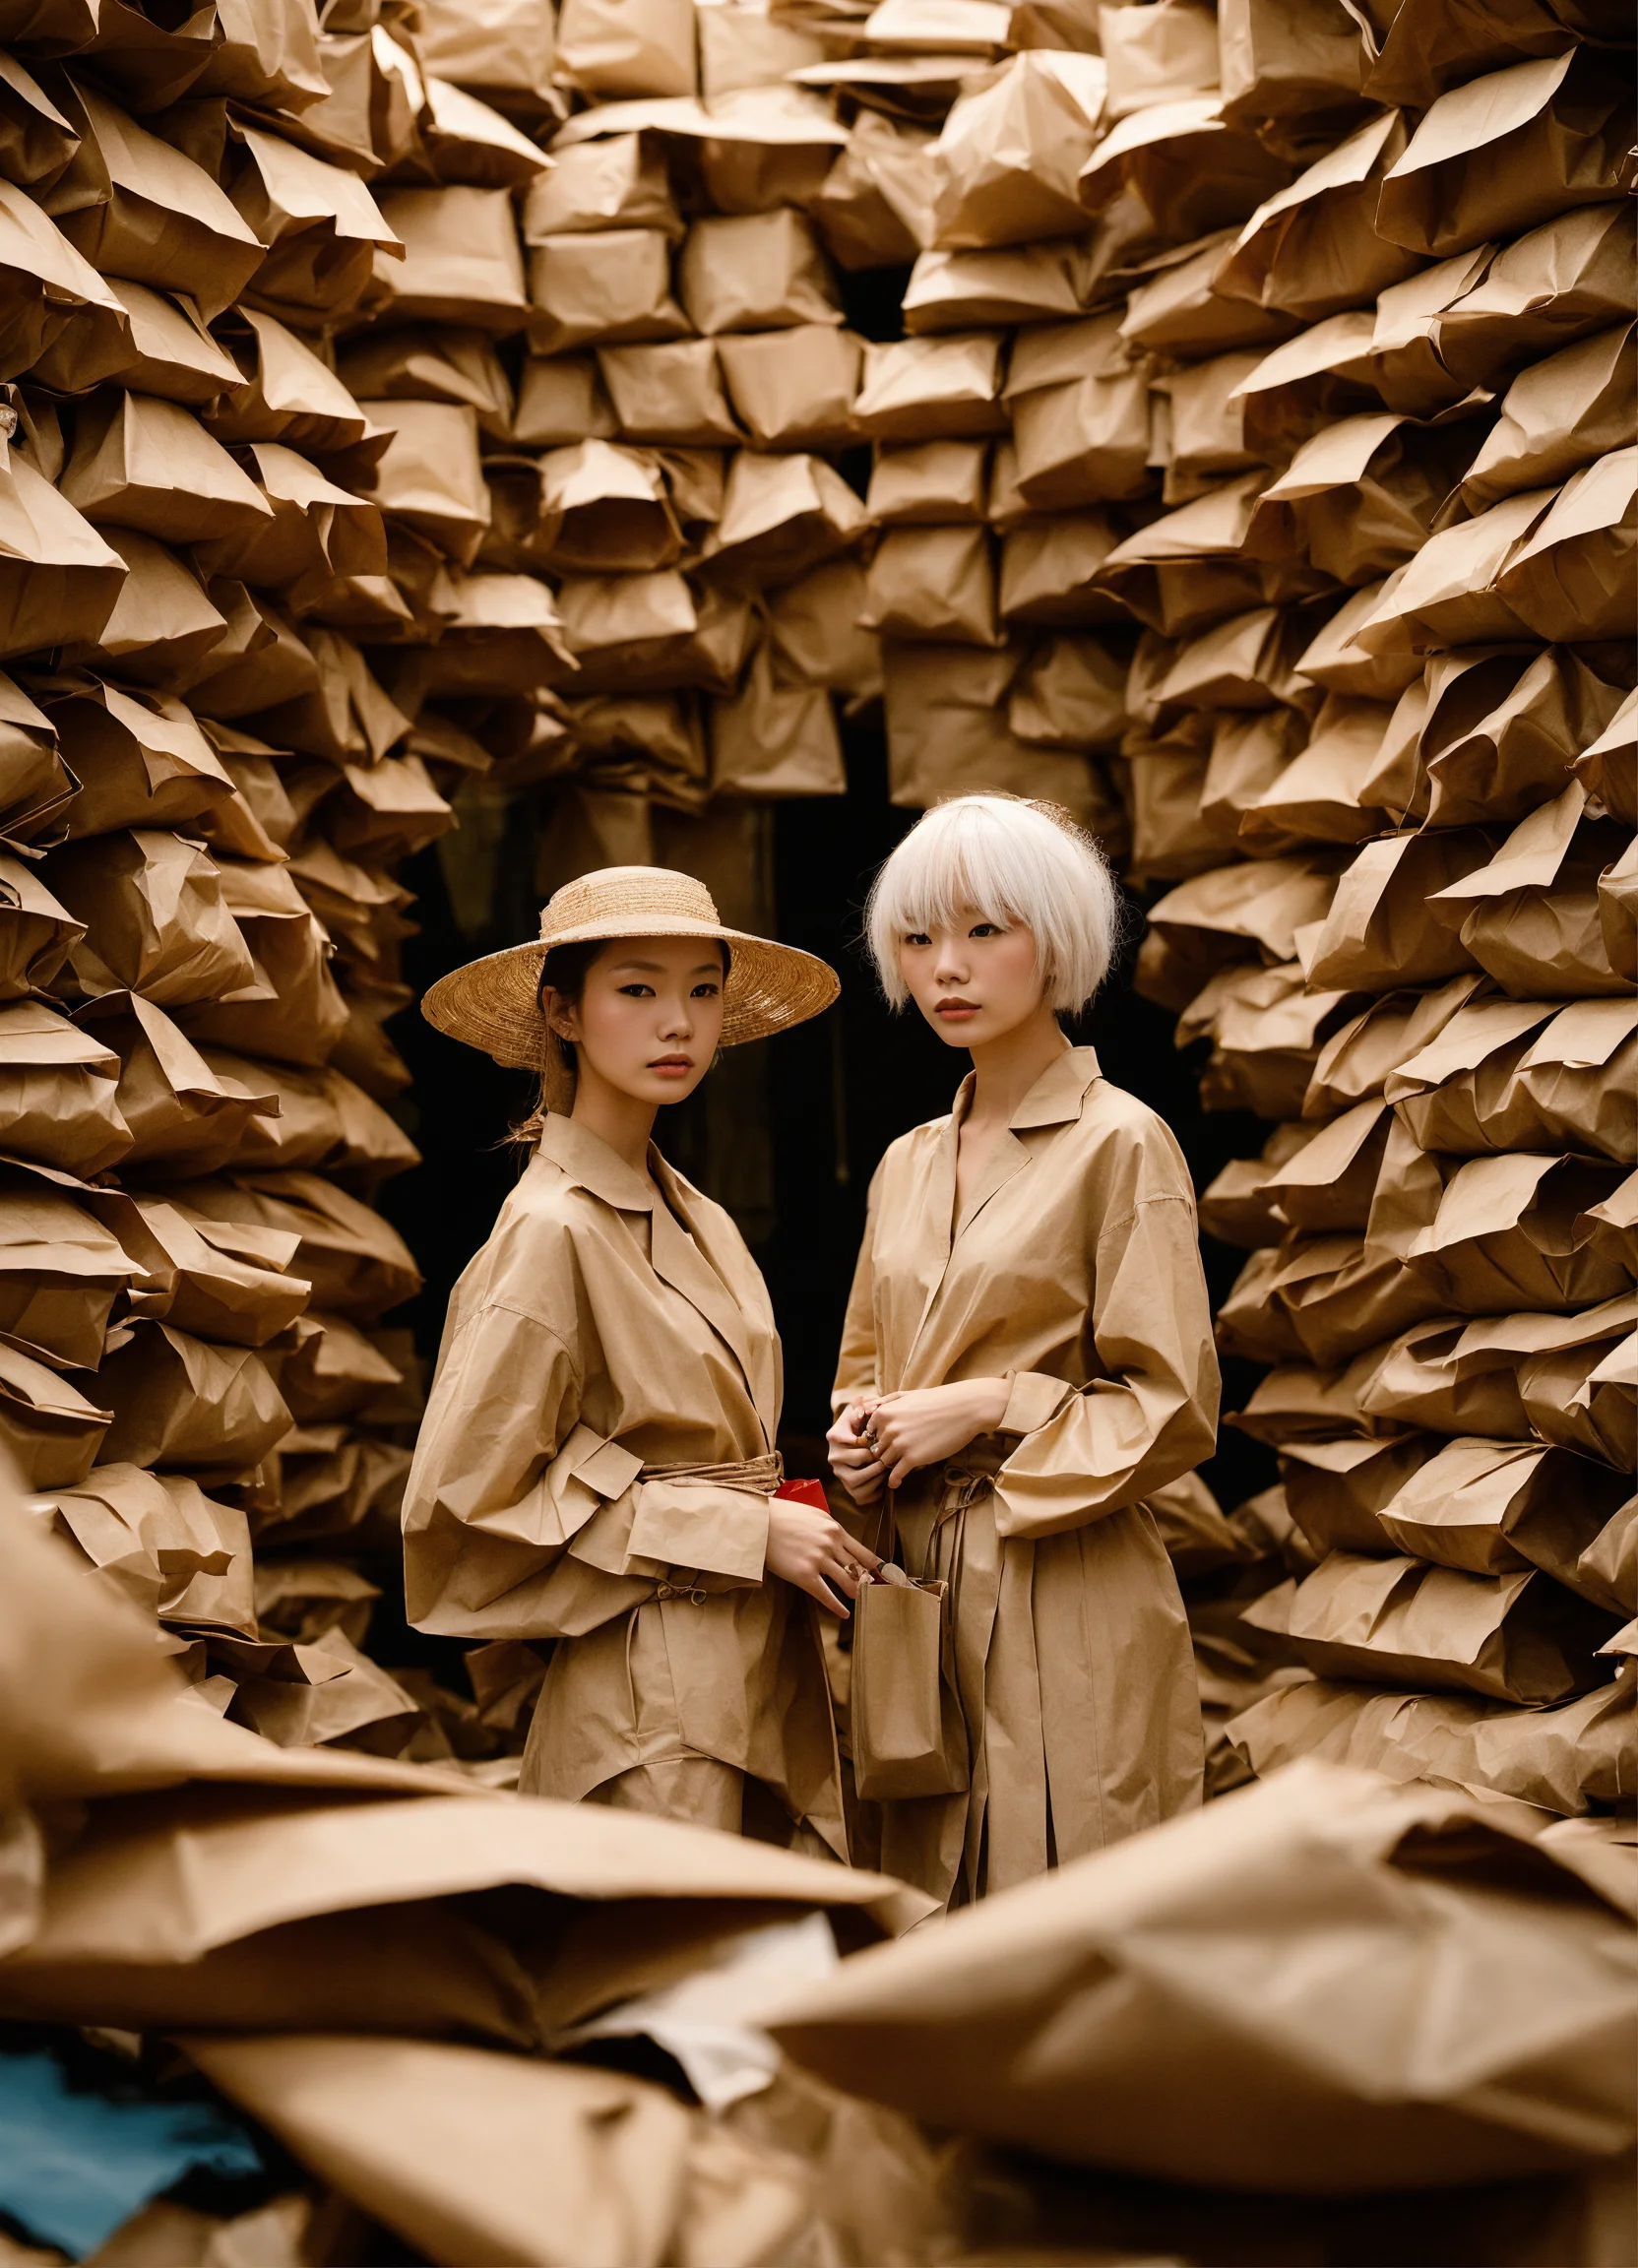 Lexica 2 Albino Japanese Models Straight Light Brown Hair With Bangs Paper Bags Littered 